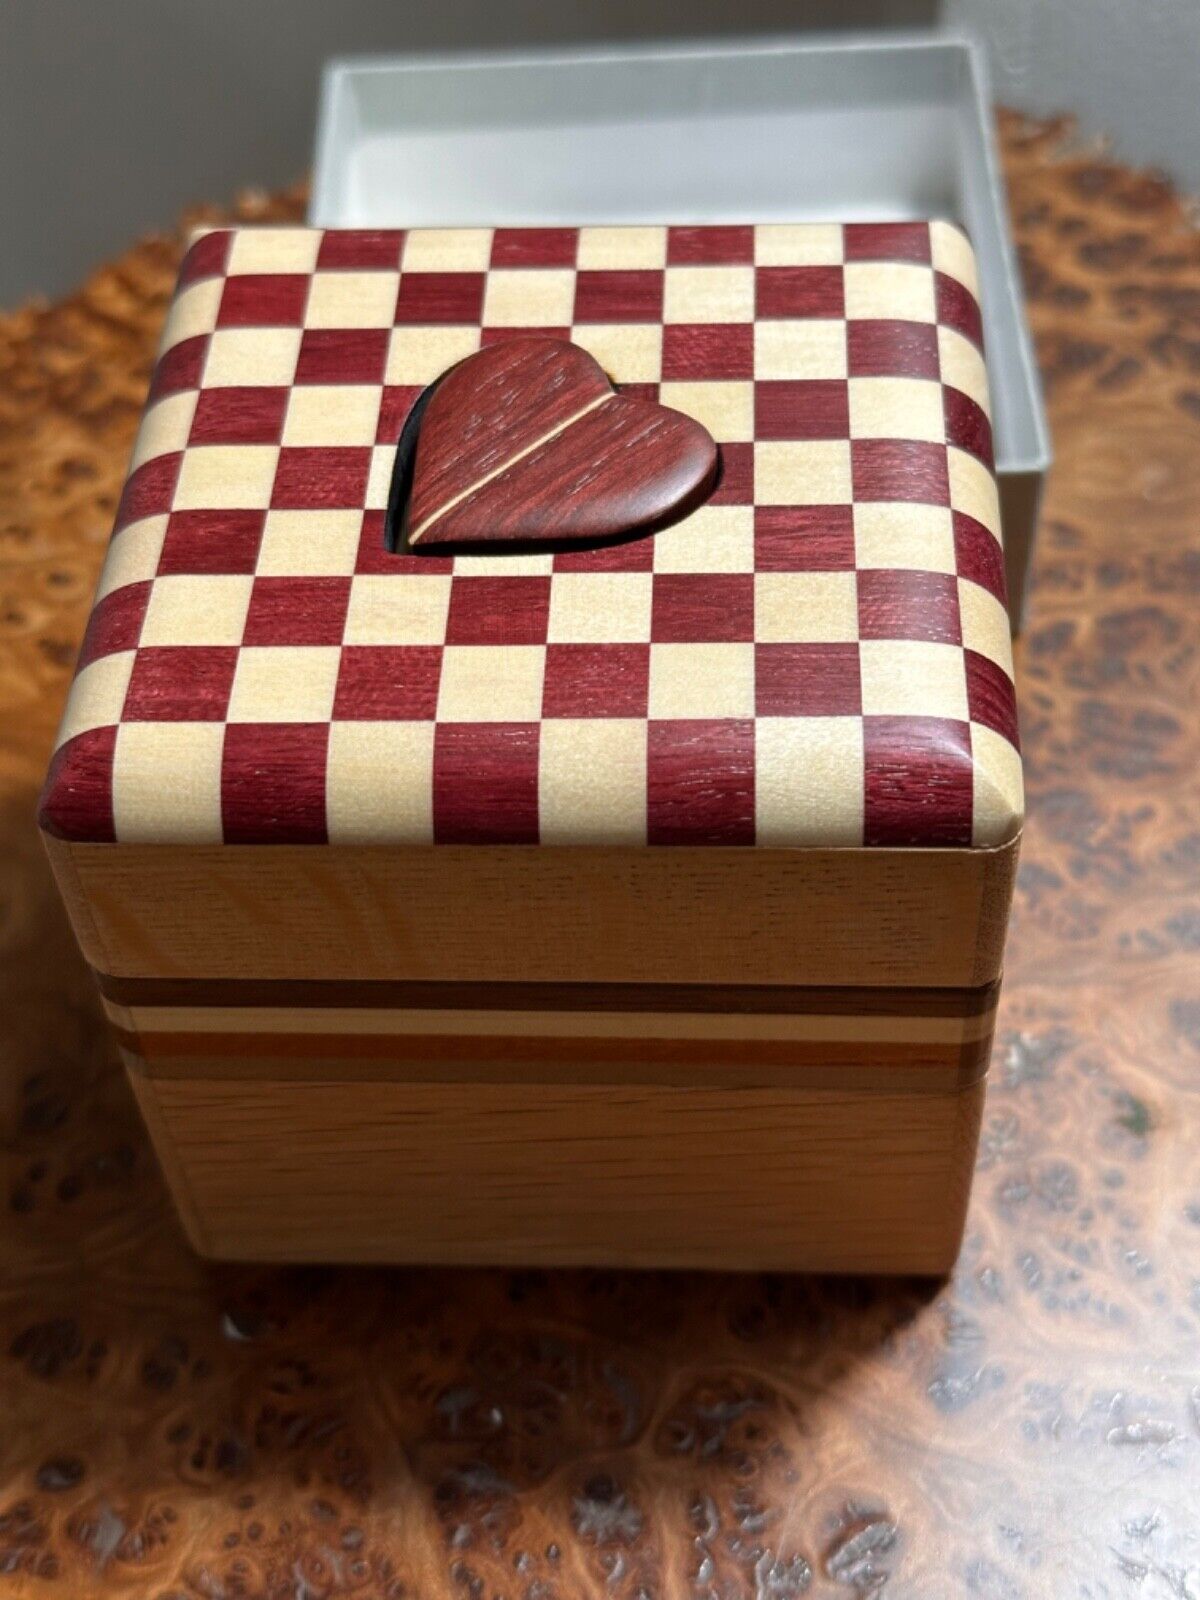 A CHANCE MEETING / Japanese Puzzle Box